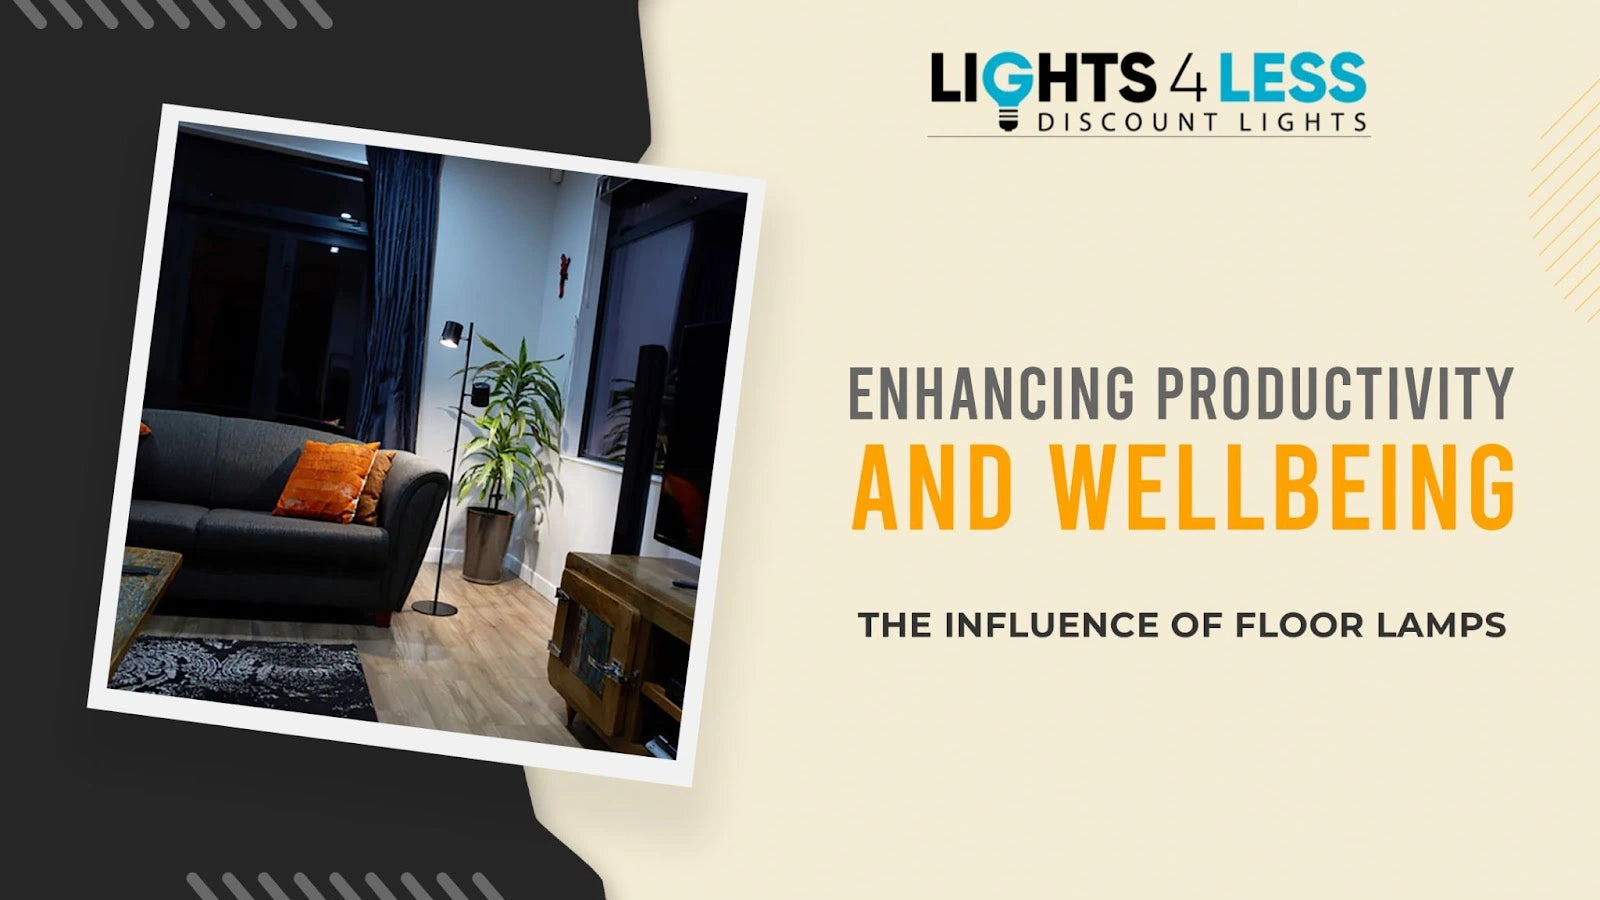 How Floor Lamps Impact Productivity and Wellbeing